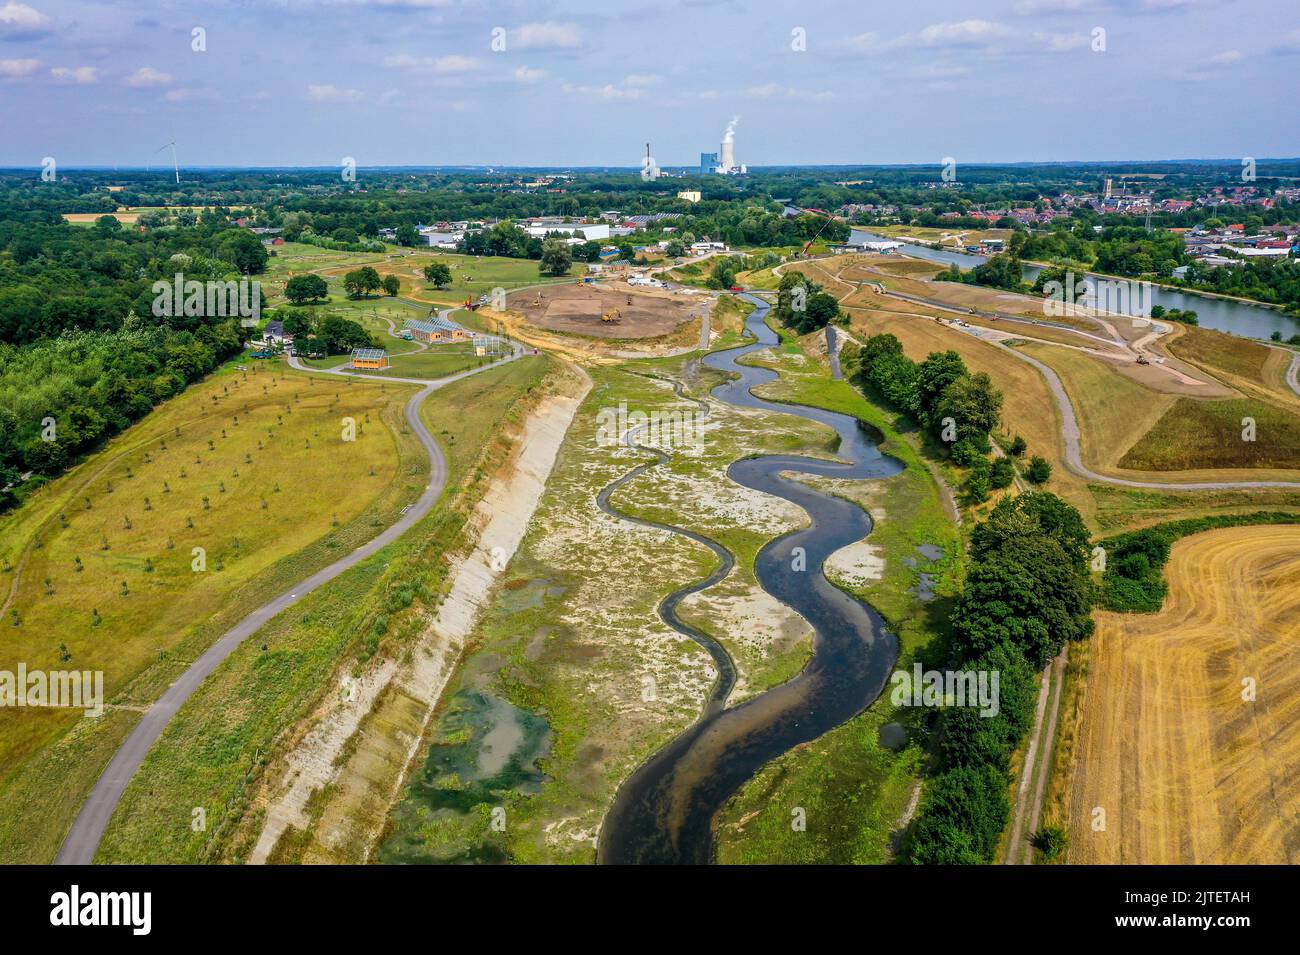 Recklinghausen, Castrop-Rauxel, North Rhine-Westphalia, Germany - EMSCHERLAND construction project, a 37-hectare water and nature experience park at t Stock Photo